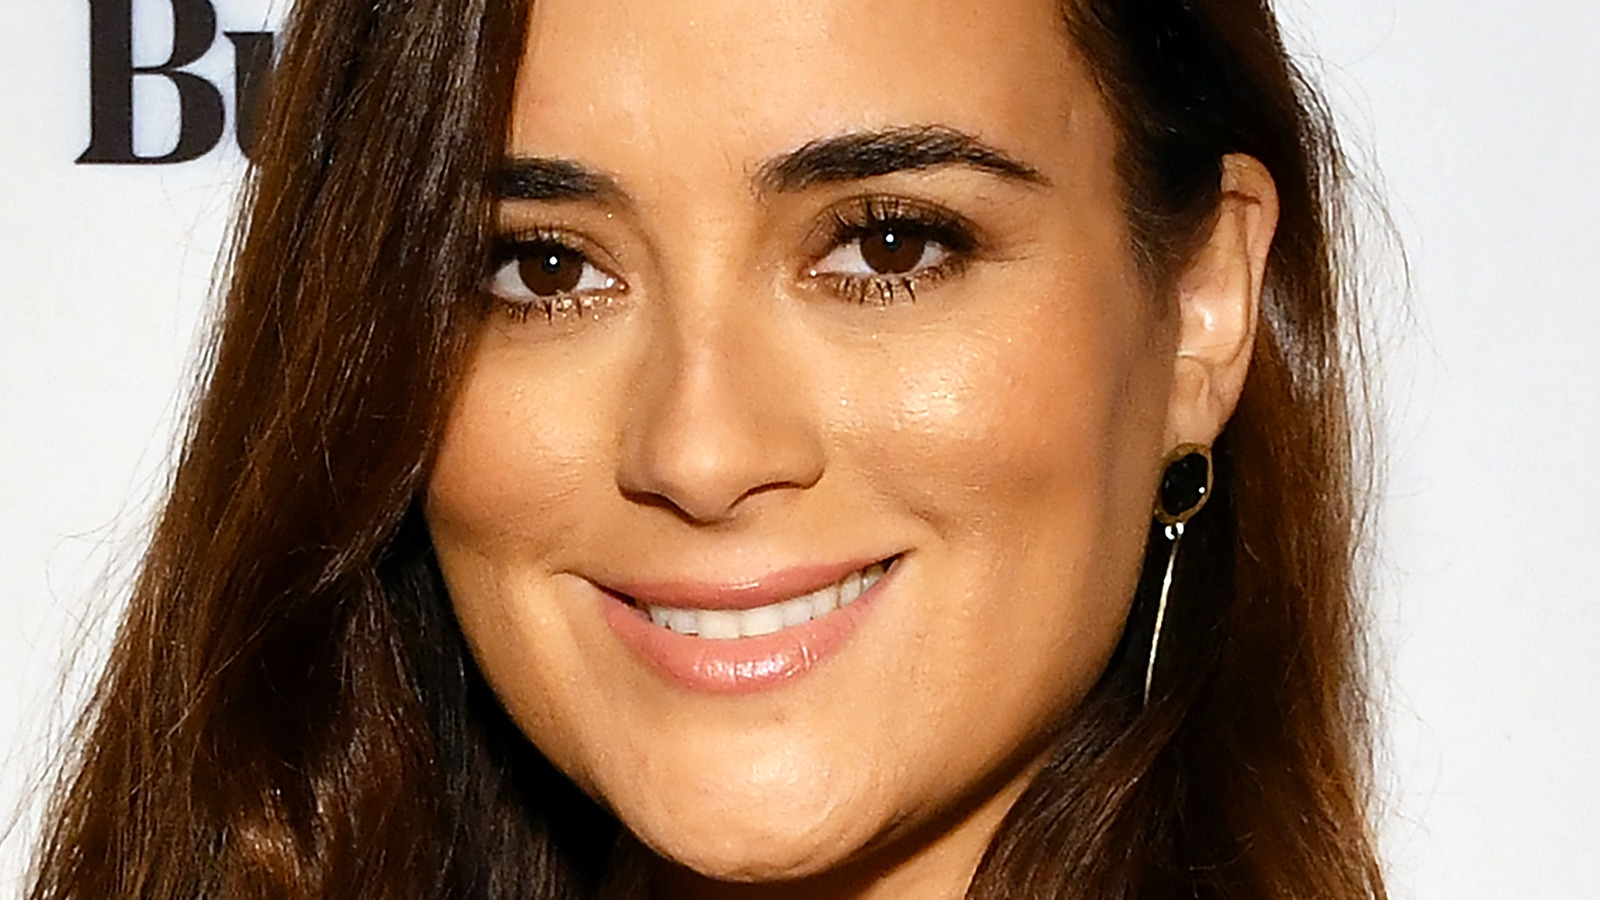 Cote De Pablo Turned Down This Massive Opportunity To Star In NCIS